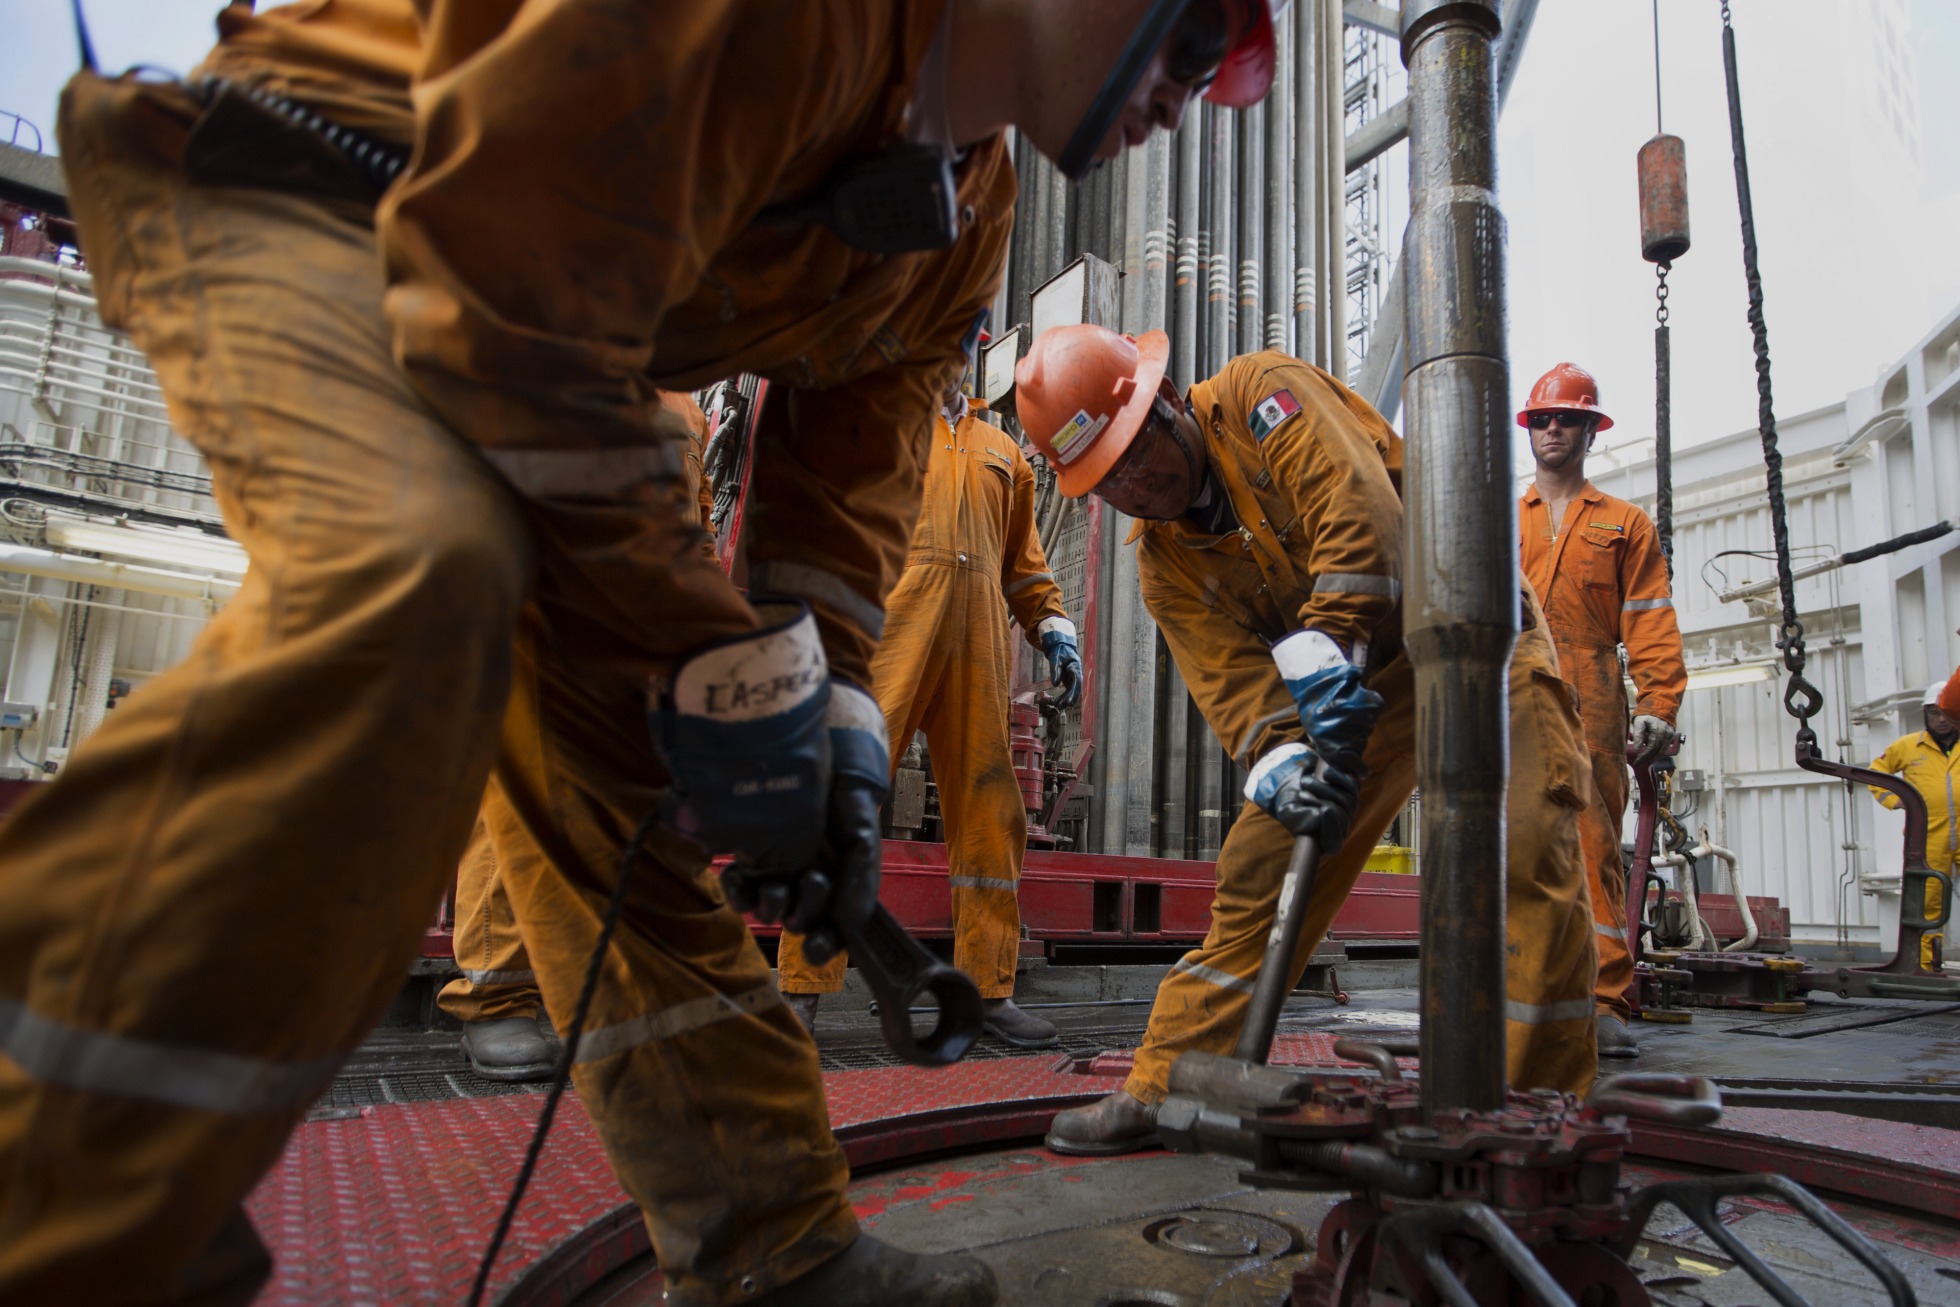 Workers prepare drilling pipe on a crude oil platform in the waters off of Veracruz, Mexico.